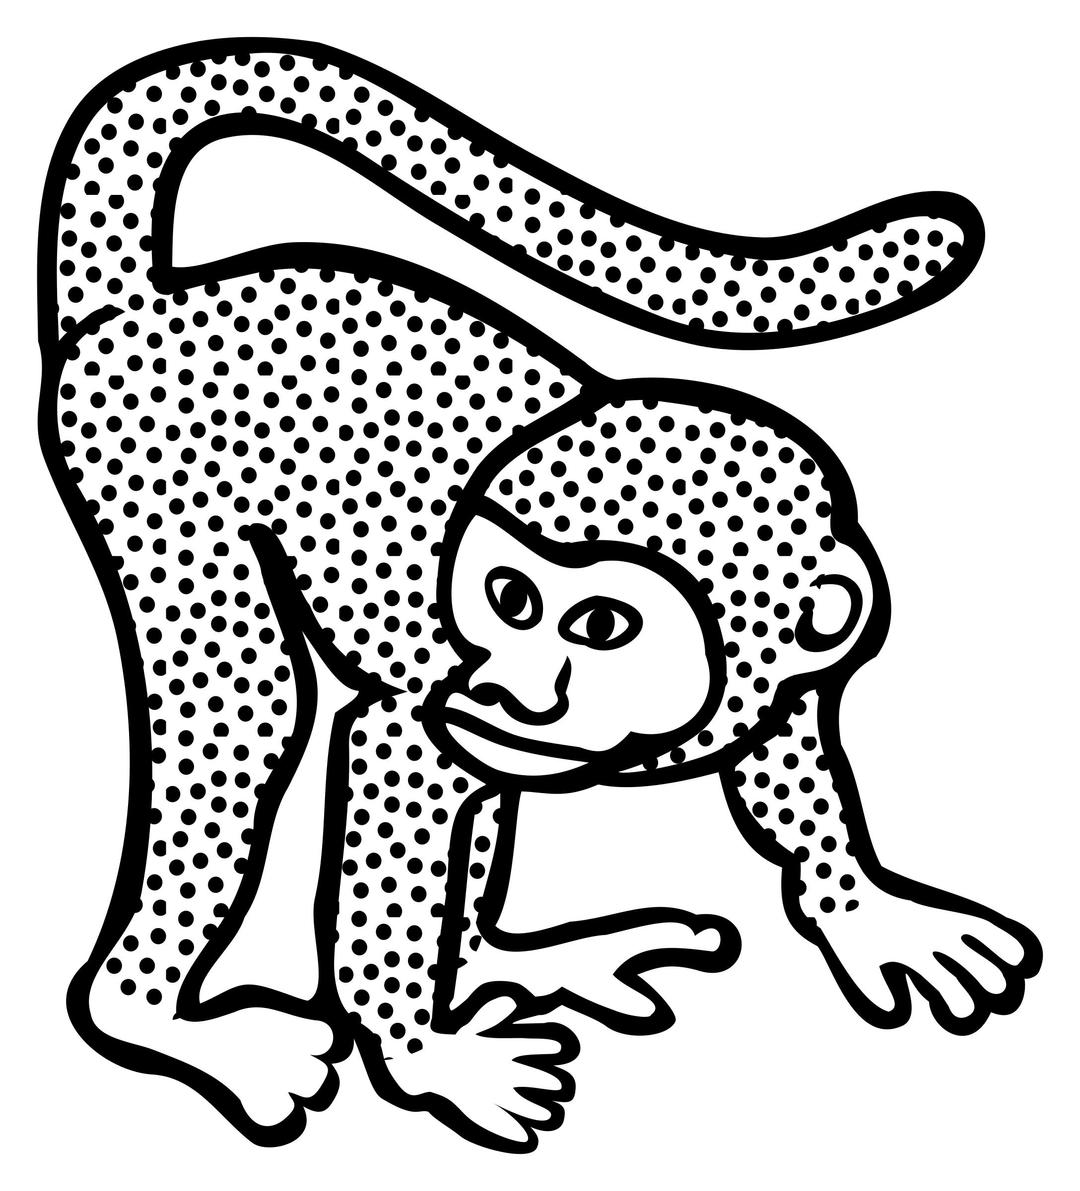 monkey - lineart png transparent